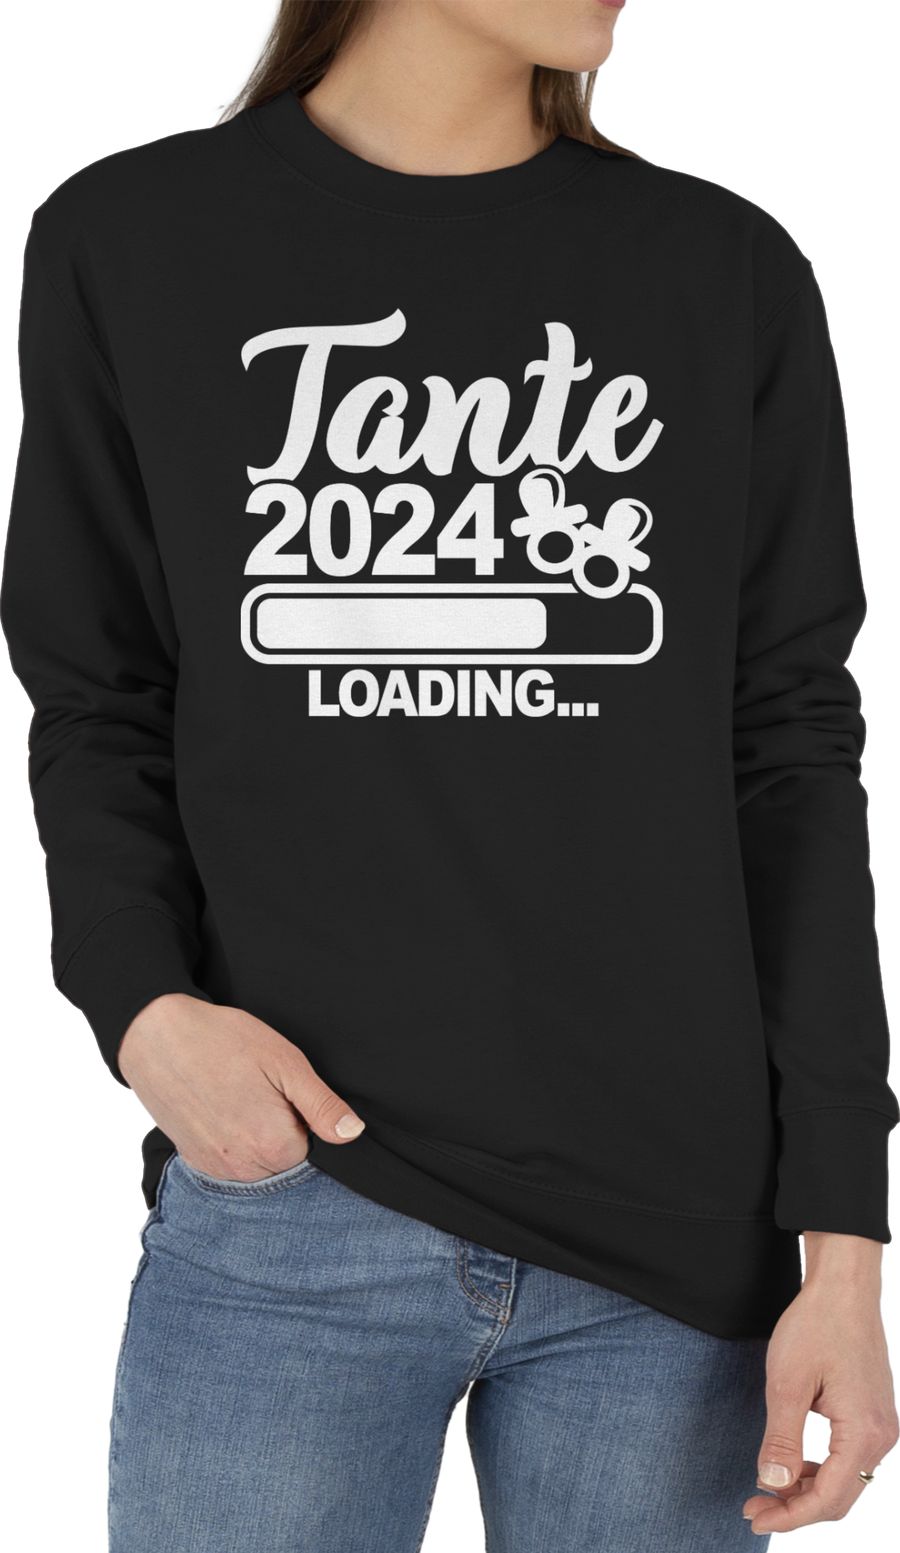 Tante 2024 loading - weiß